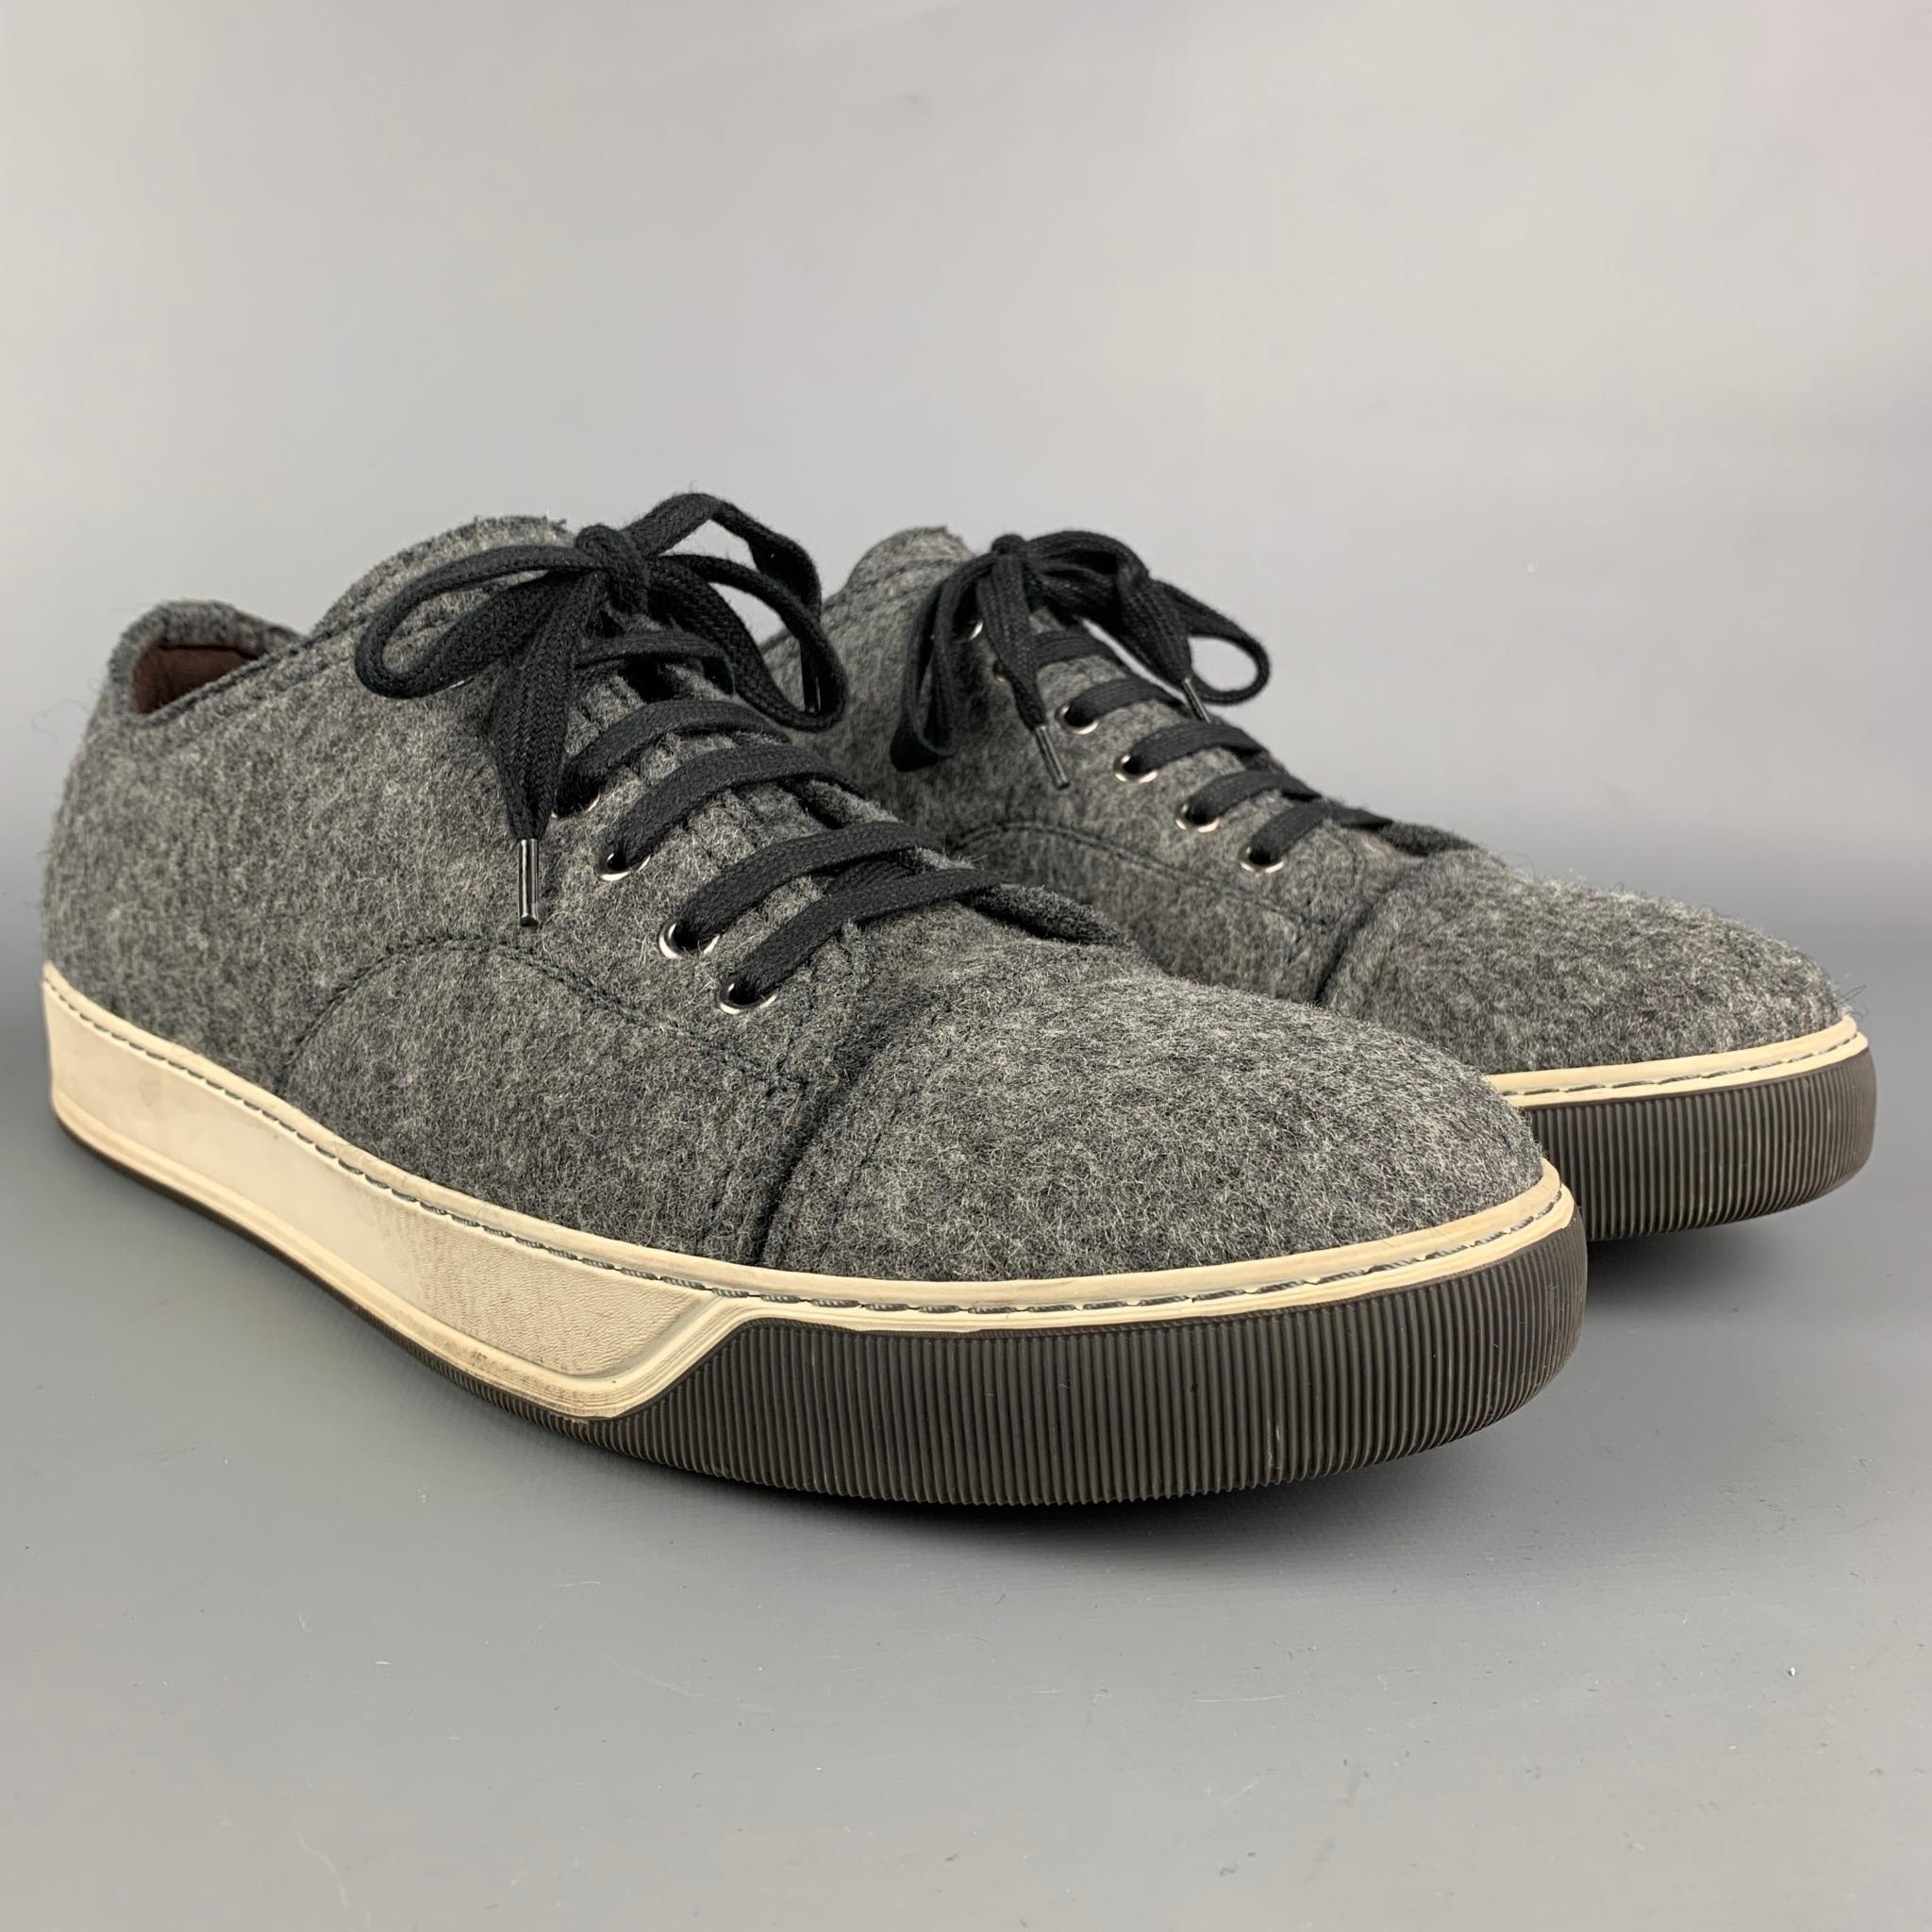 LANVIN sneakers comes in a dark gray textured fabric featuring a cap toe, rubber sole, and a lace up closure. Made in Portugal. 

Very Good Pre-Owned Condition.
Marked: 10

Outsole: 12.5 in. x 4.5 in. 